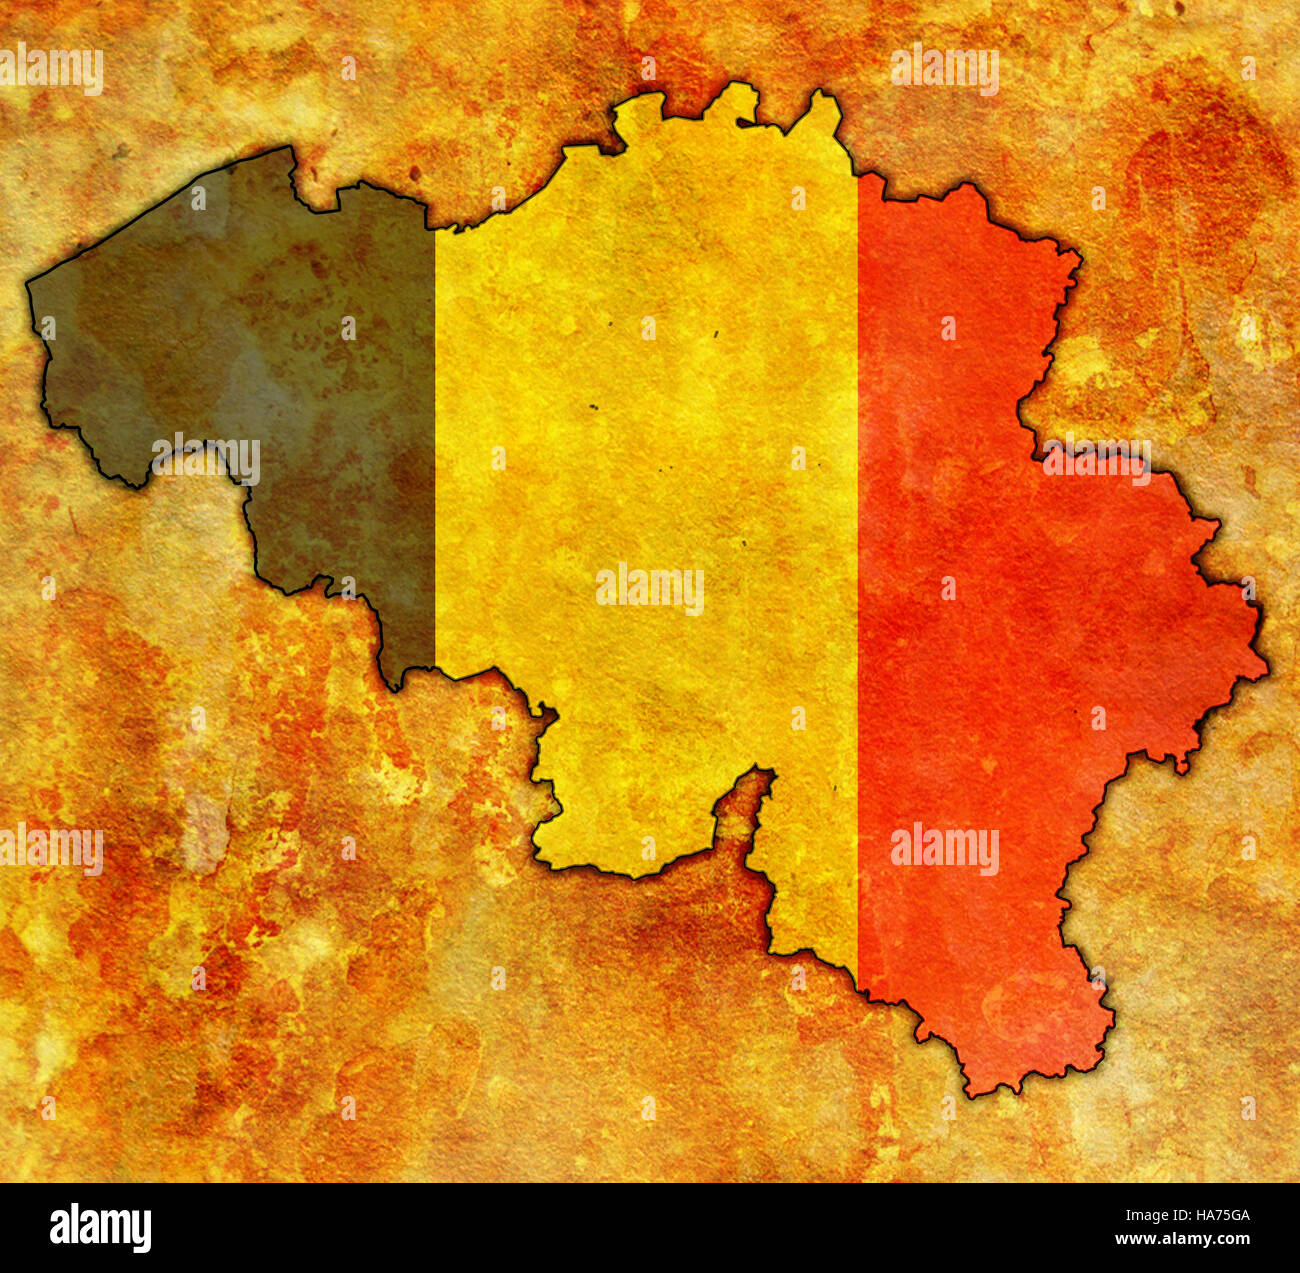 belgium flag on map of the country with border Stock Photo